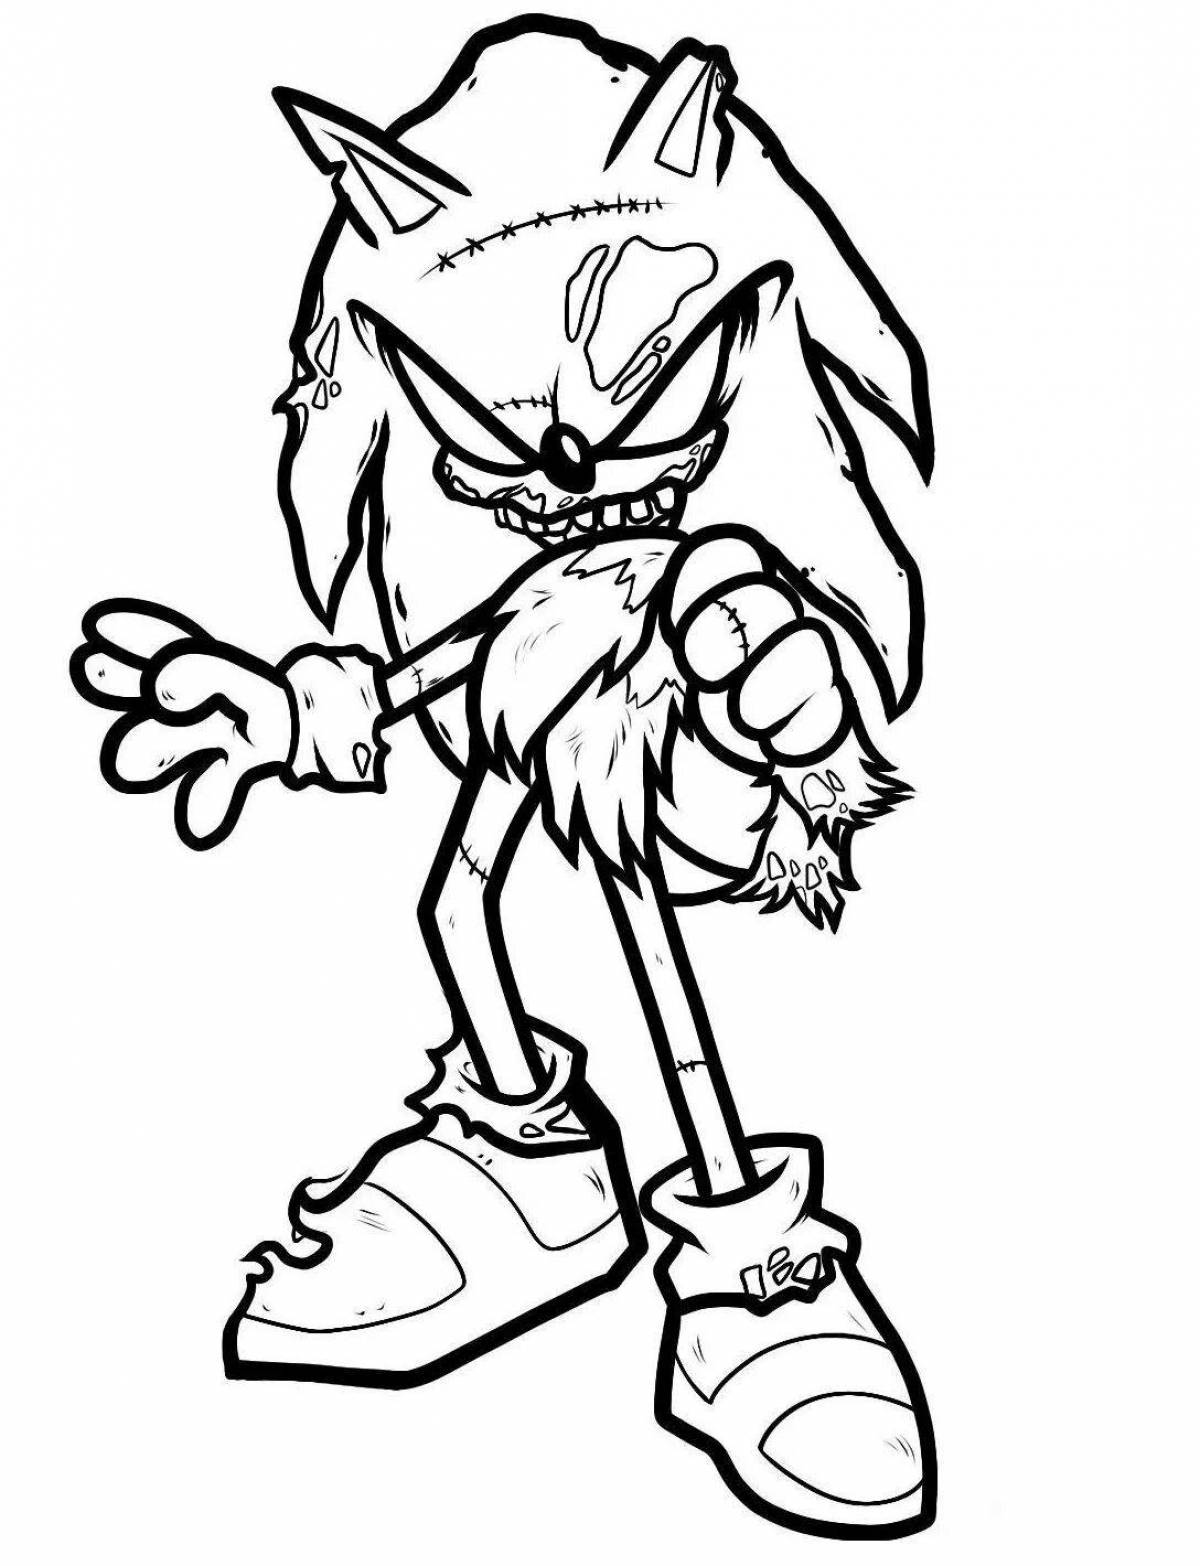 Adorable sonic egze coloring page